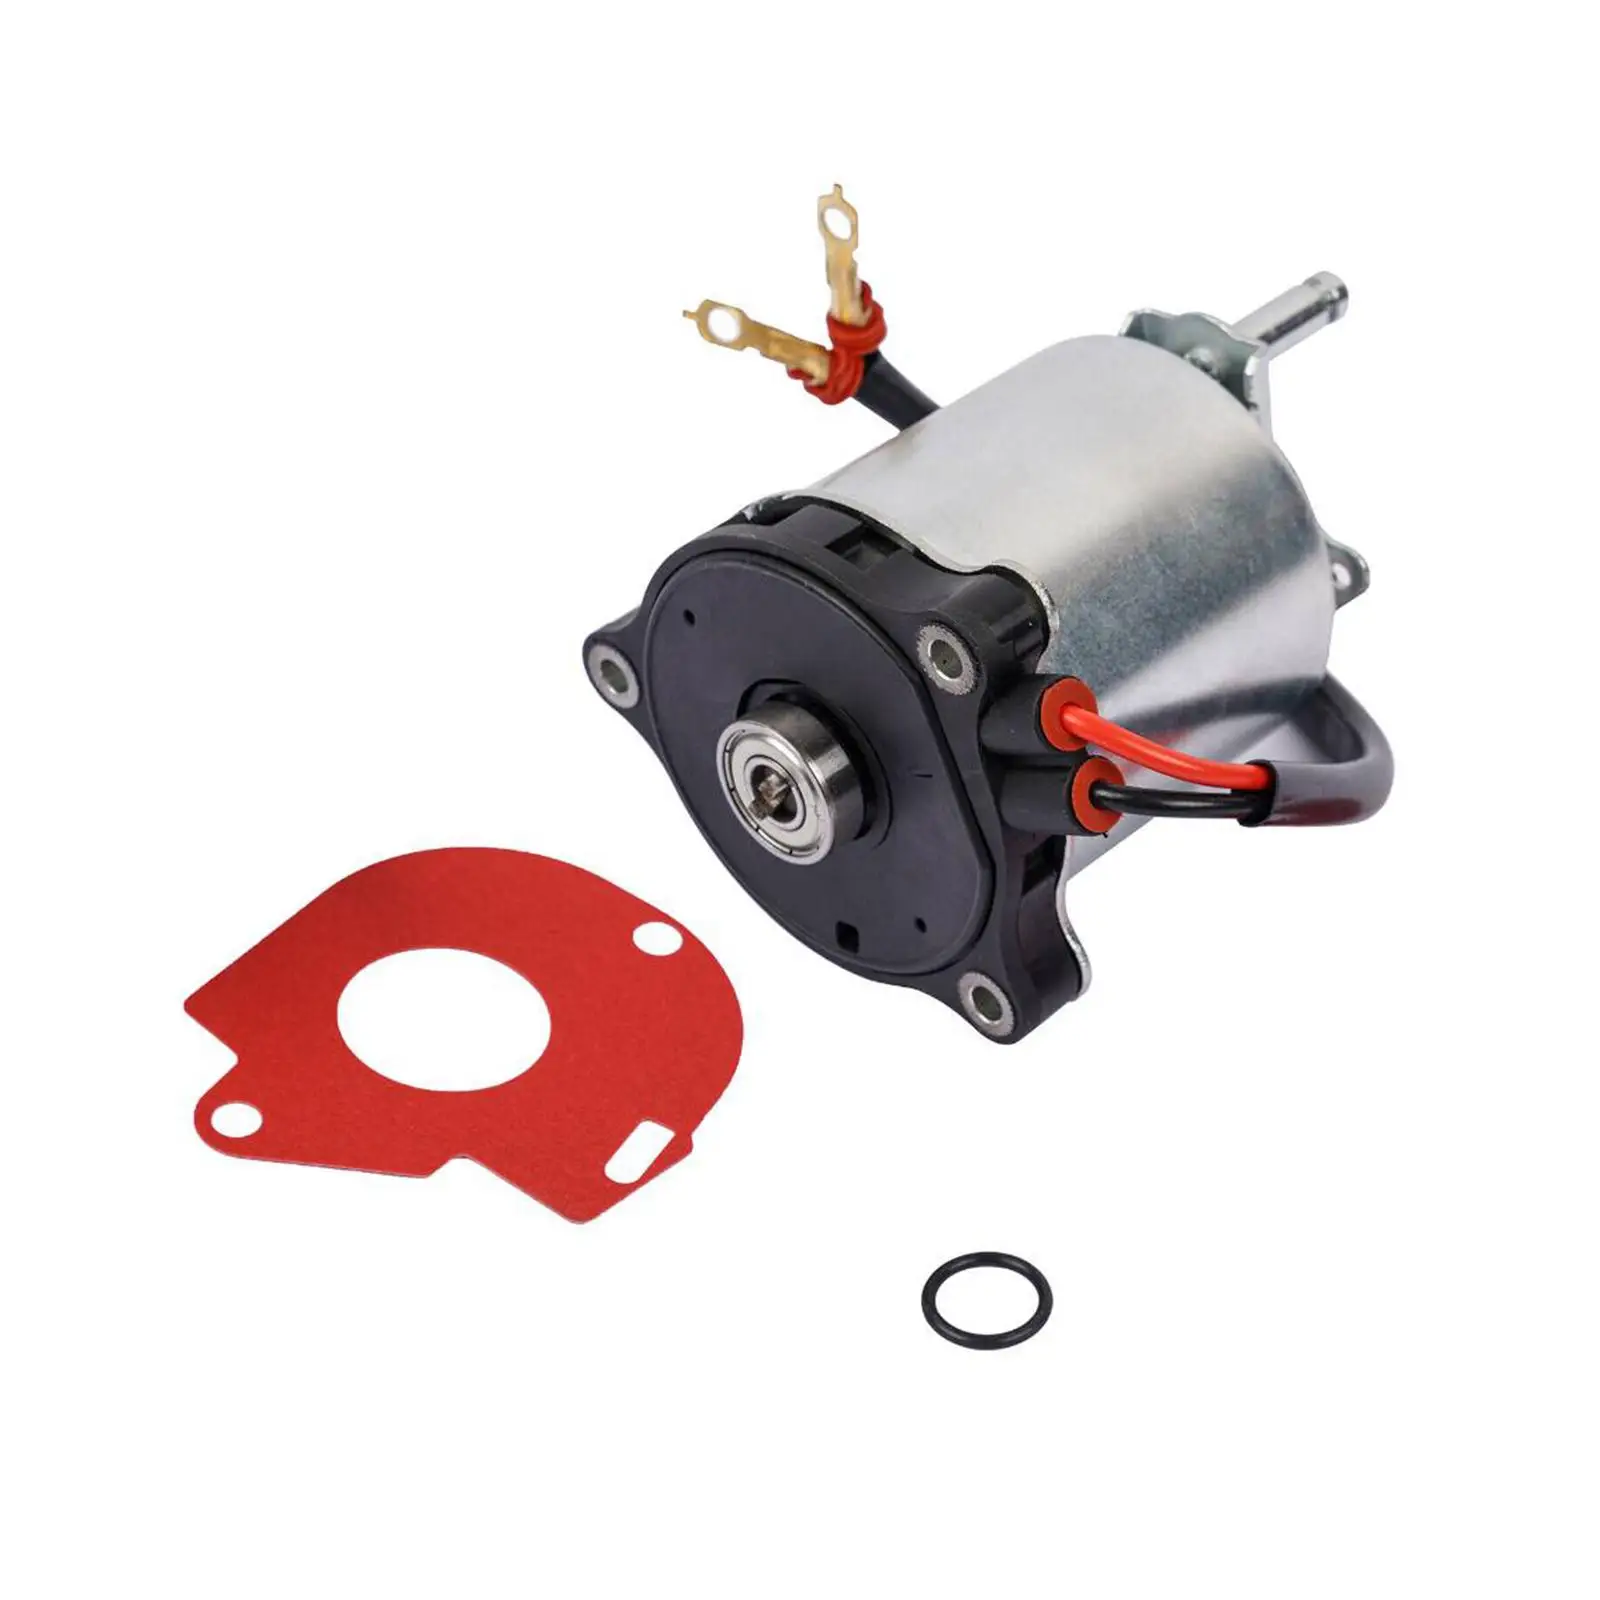 ABS Brake Booster Pump Motor 47960-60050 for Toyota Gx470 for land cruiser